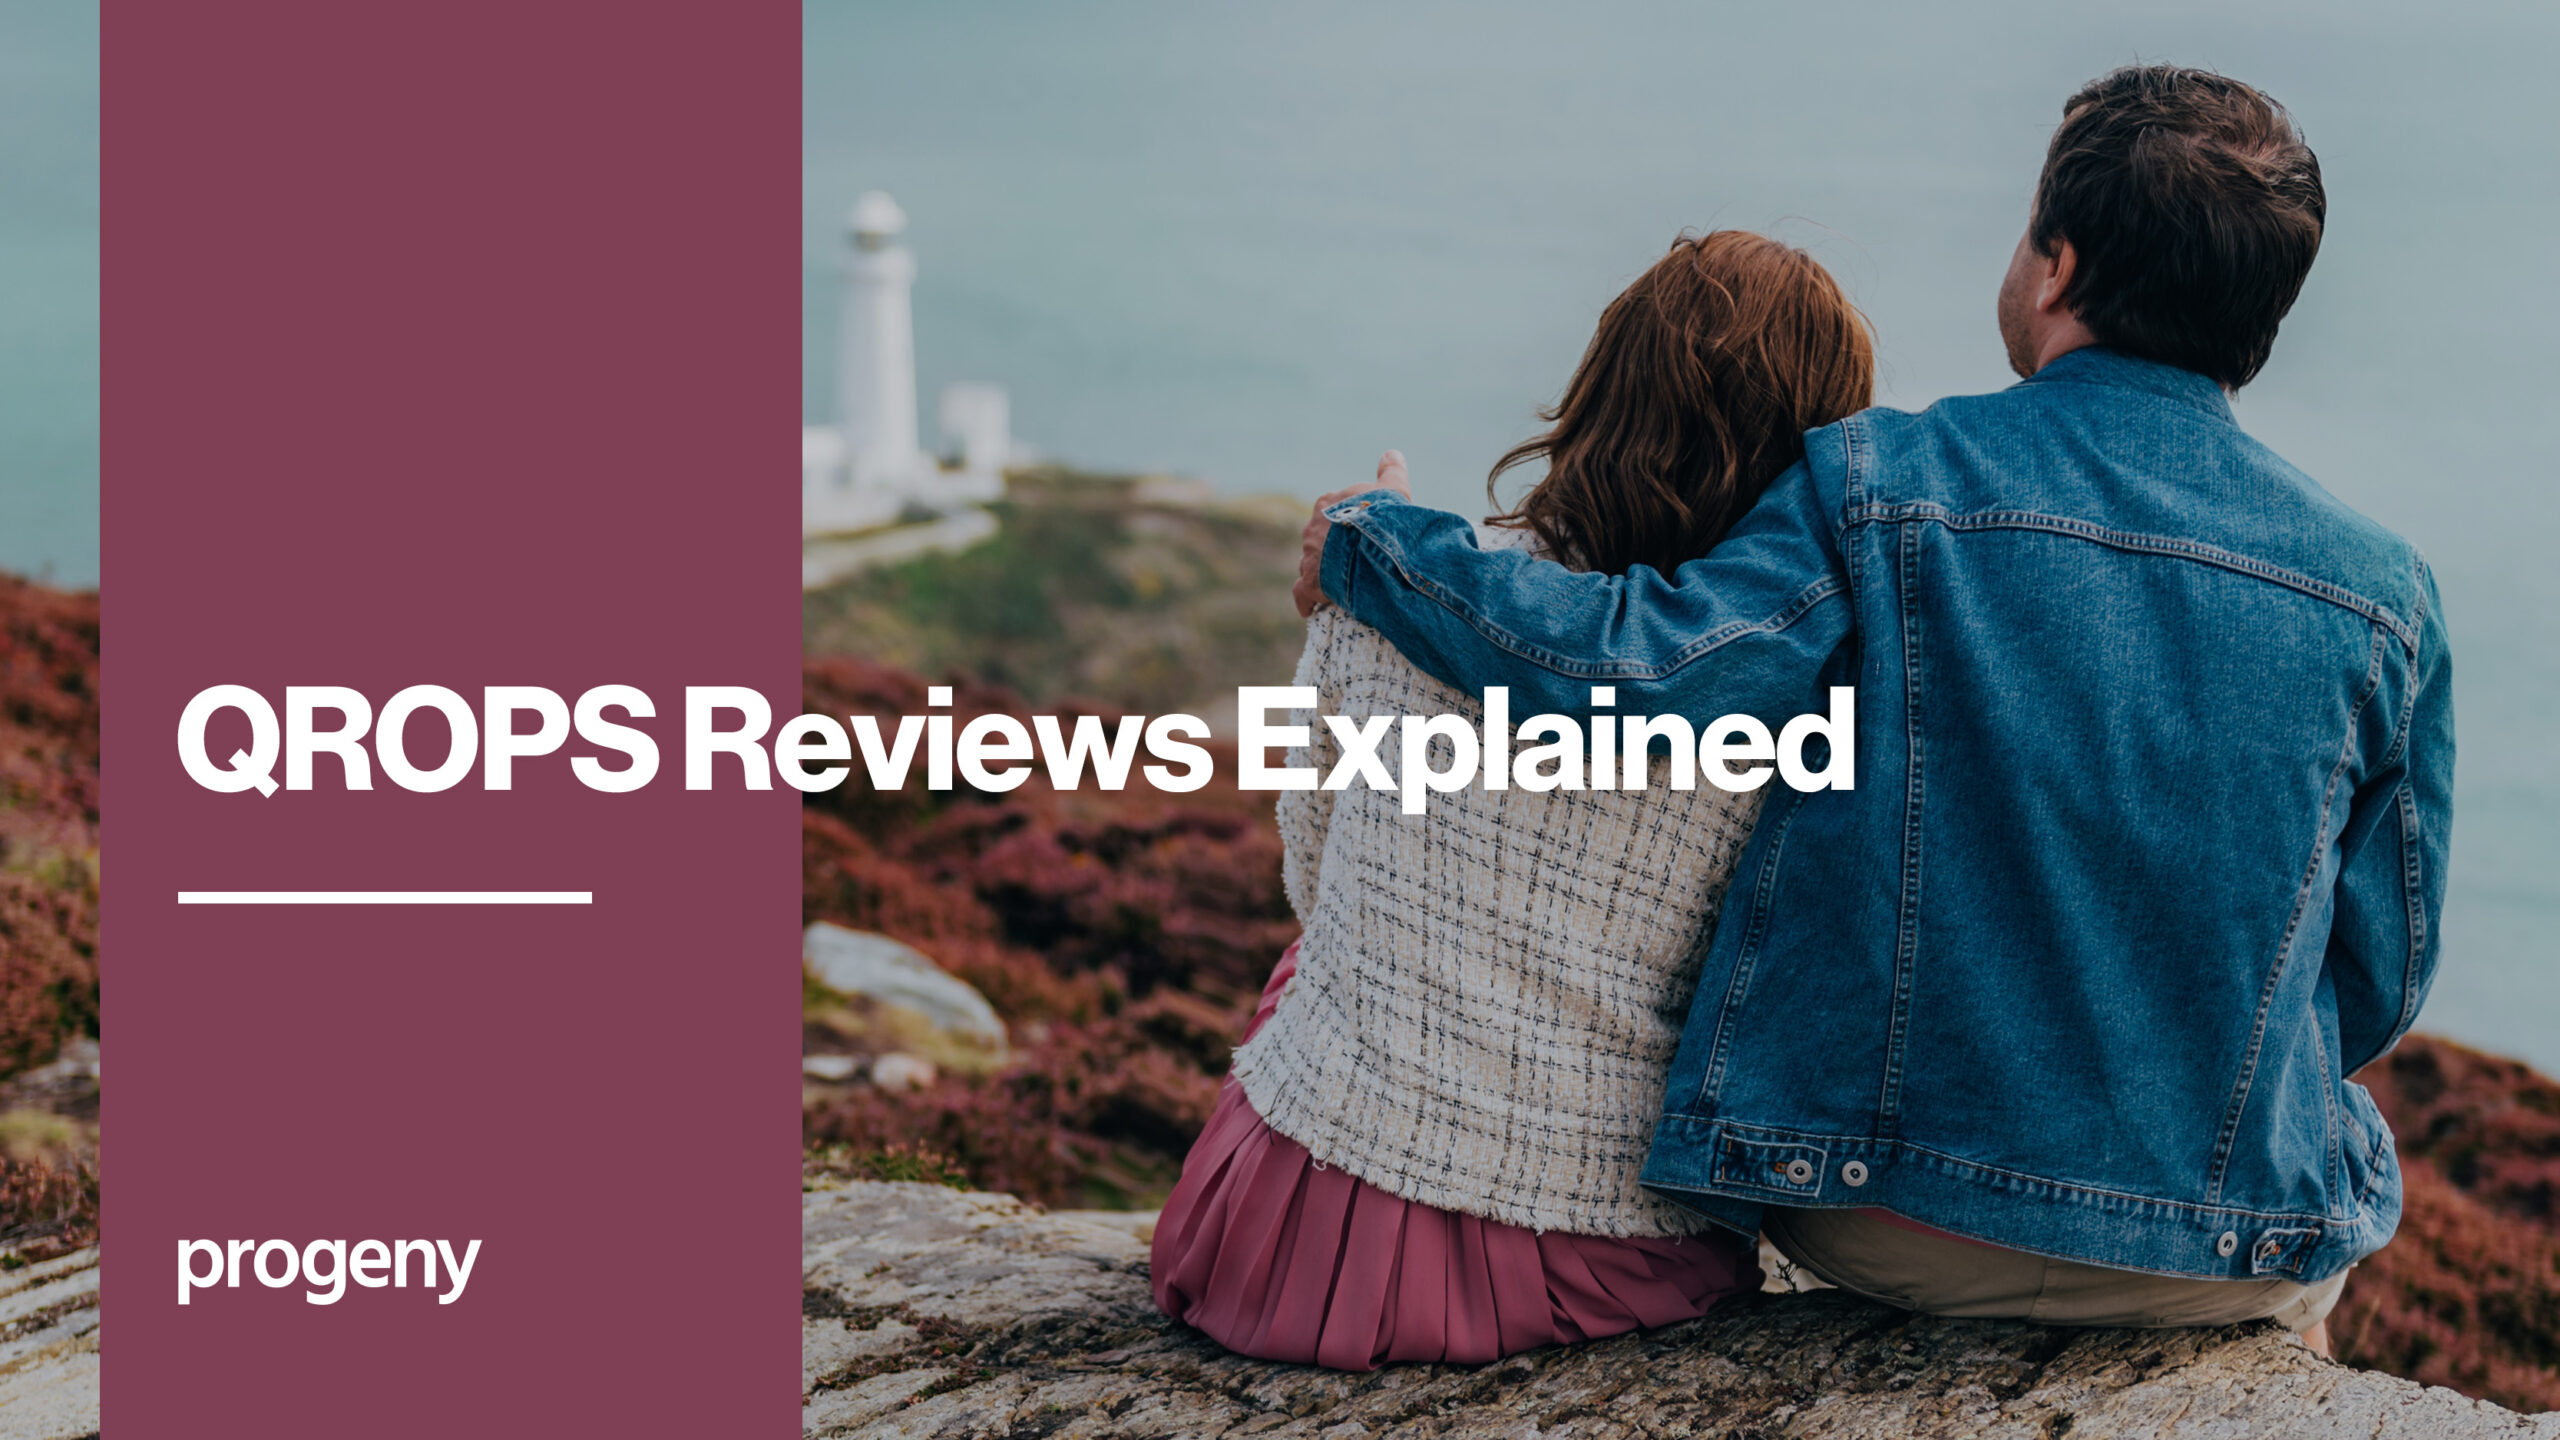 QROPS Reviews Explained